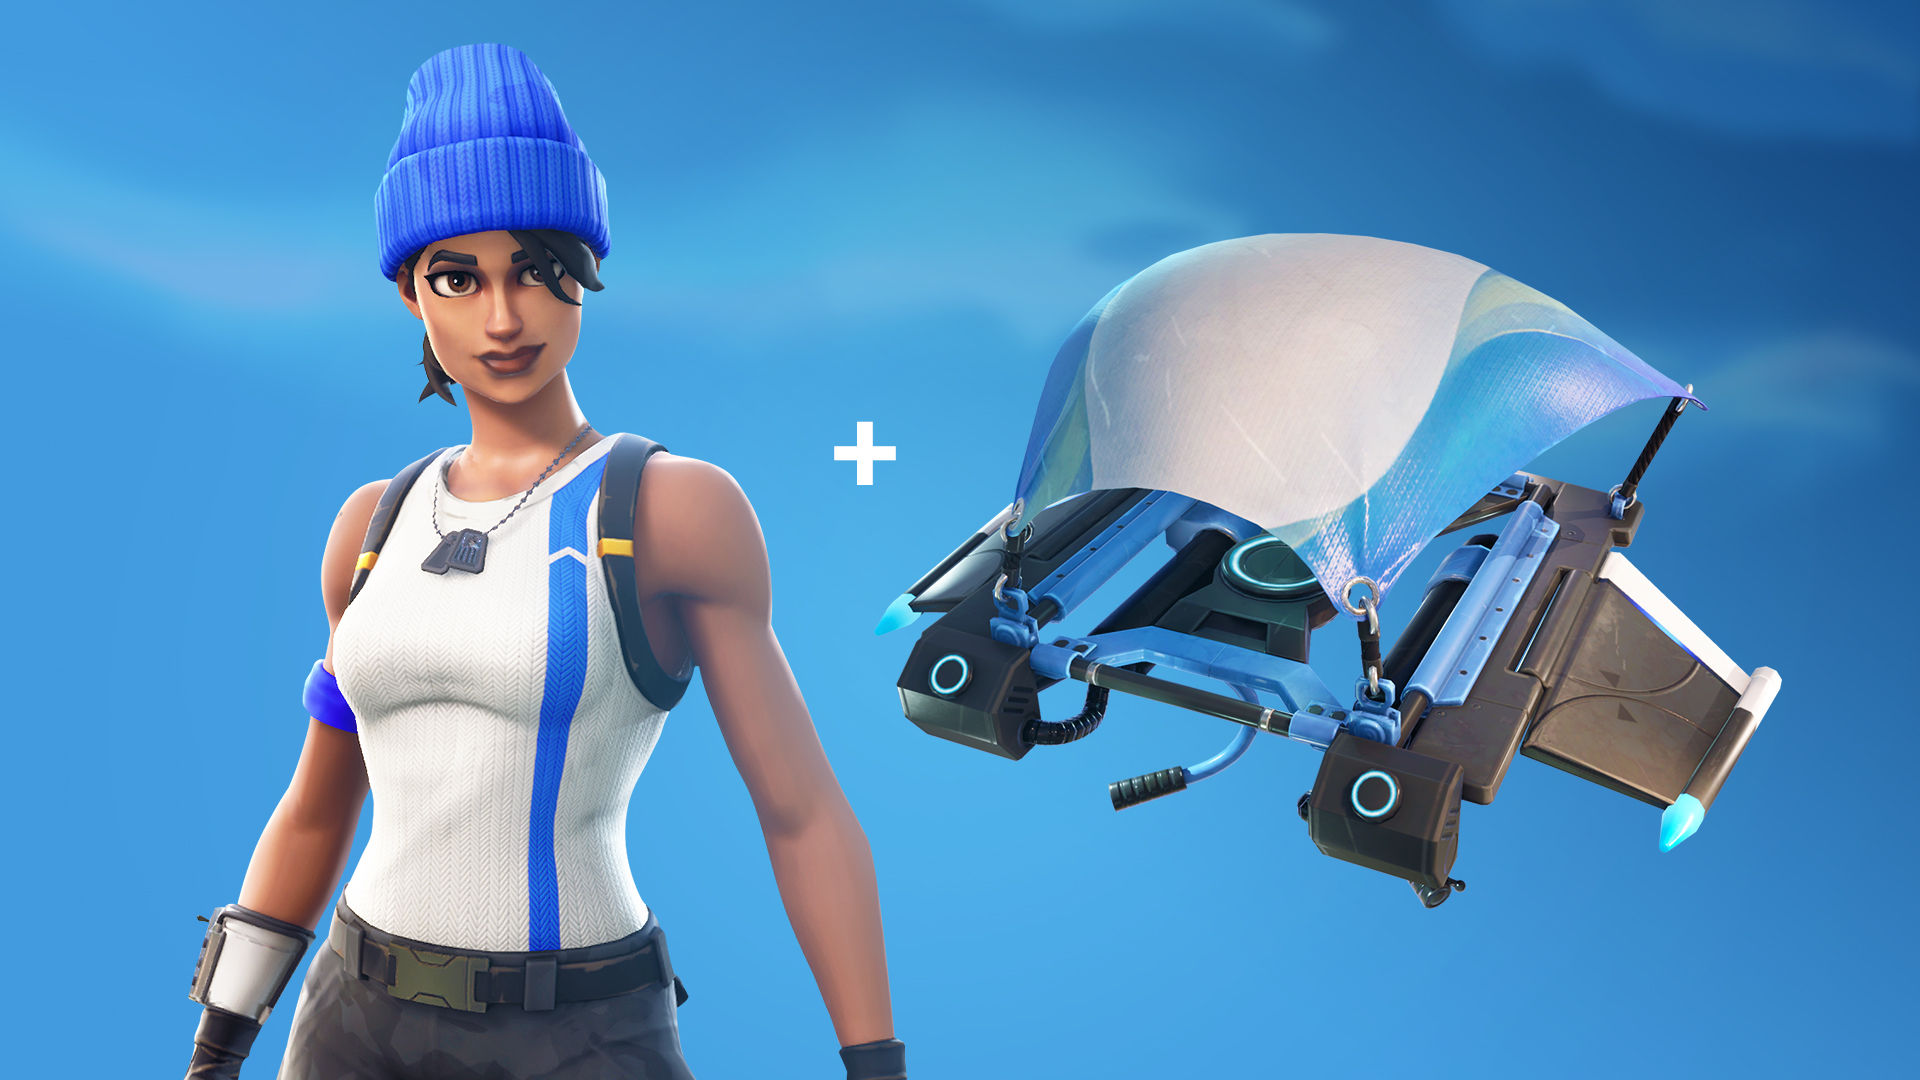 How To Get The Ps4 Skins On Fortnite How To Get The Ps Plus Exclusive Fortnite Skin On Pc Heavy Com